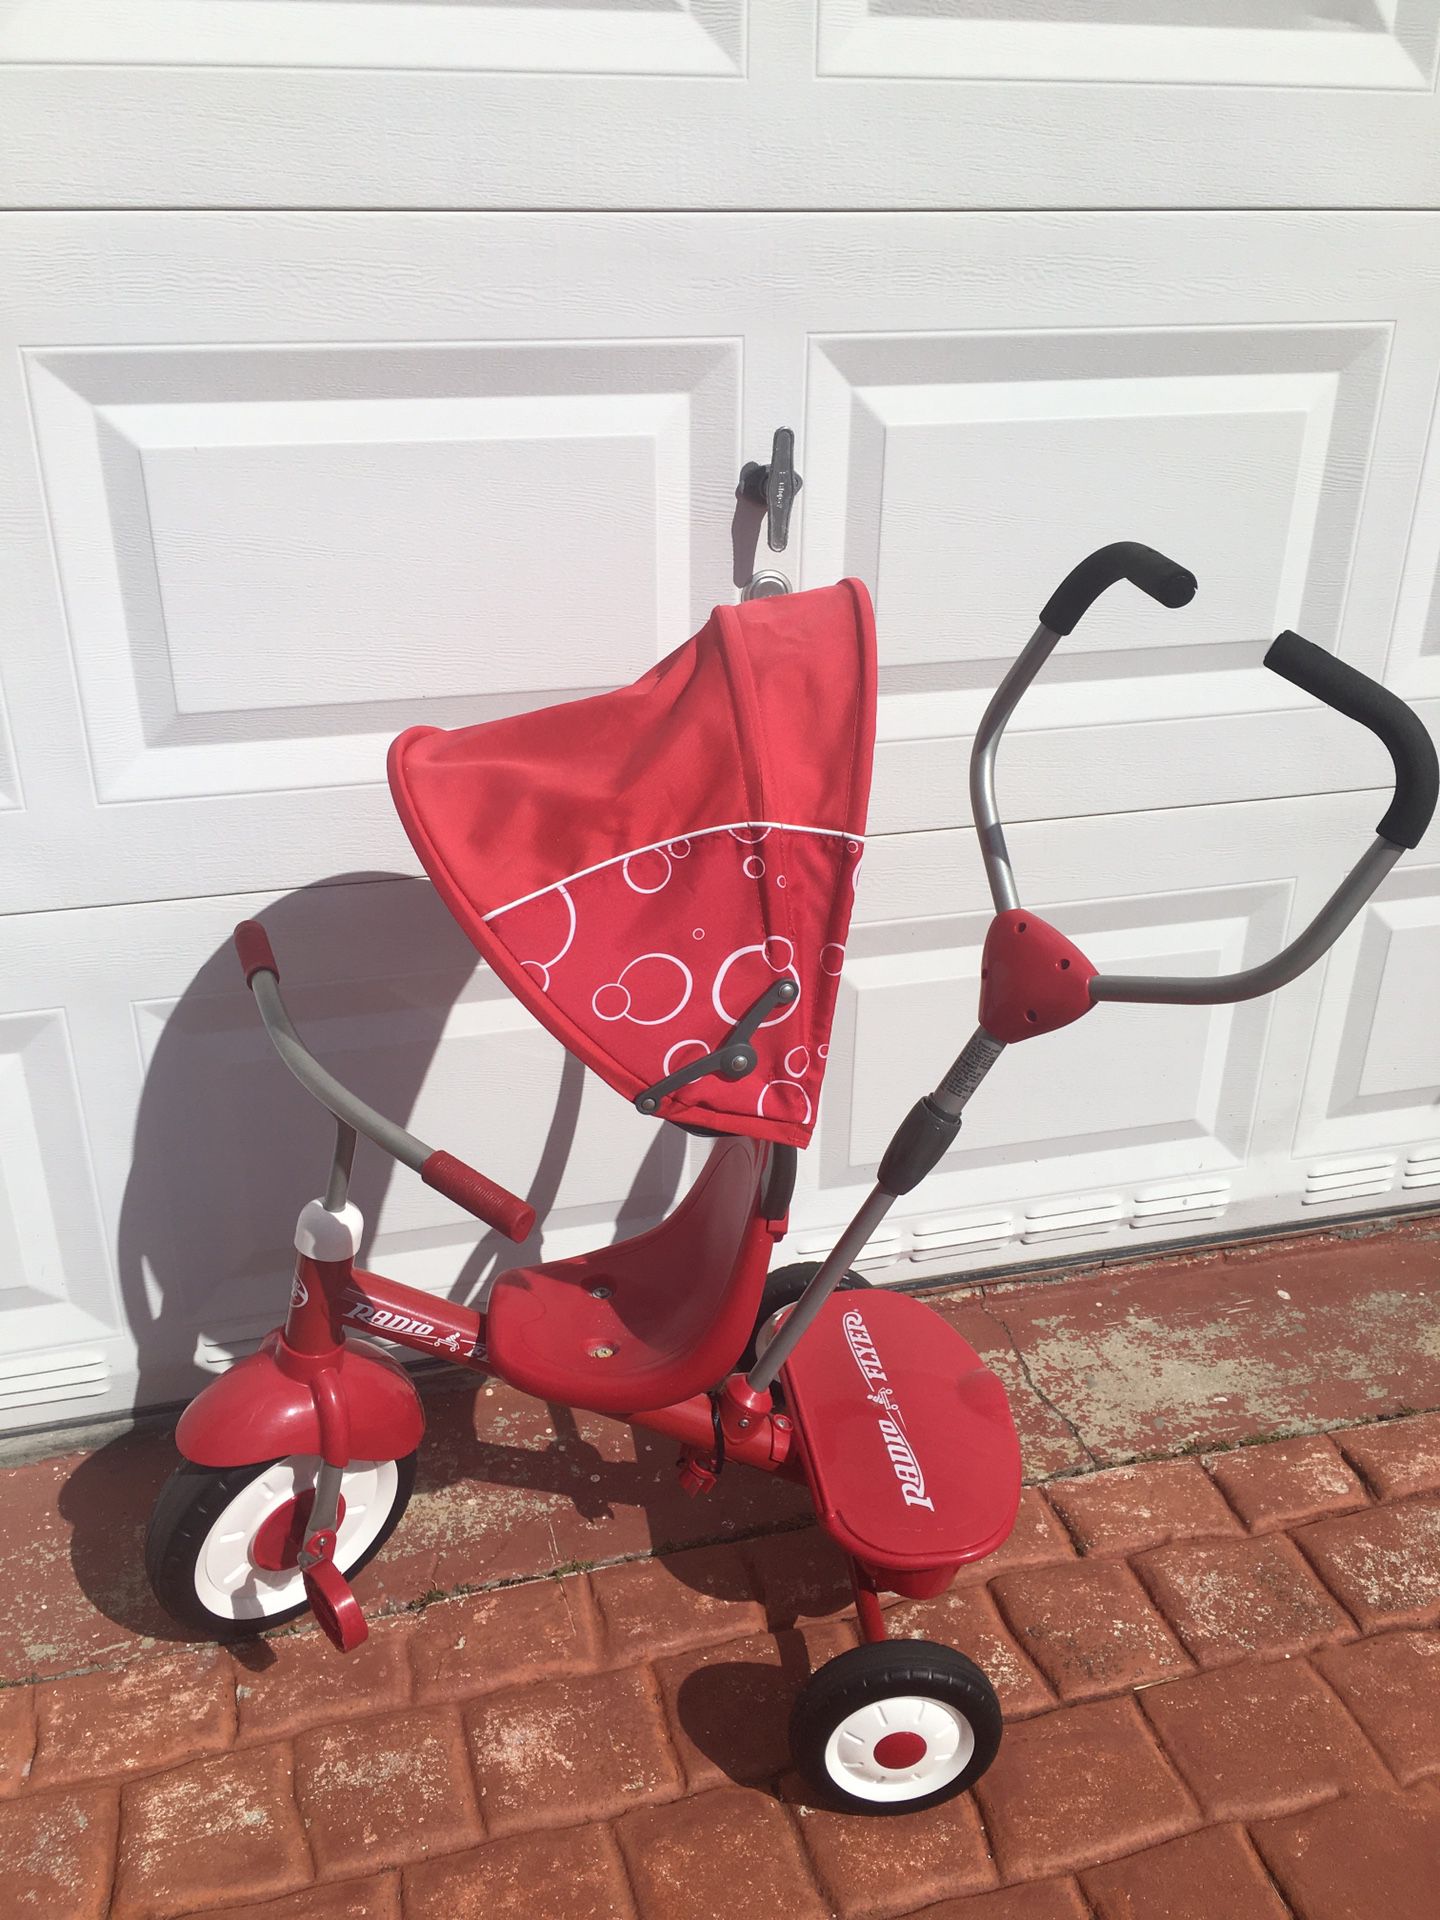 Bike for toddler, red push and peddler, learning center “Fisher” they all like new!! Only used for 3 wks while my granddaughter was here on vacation